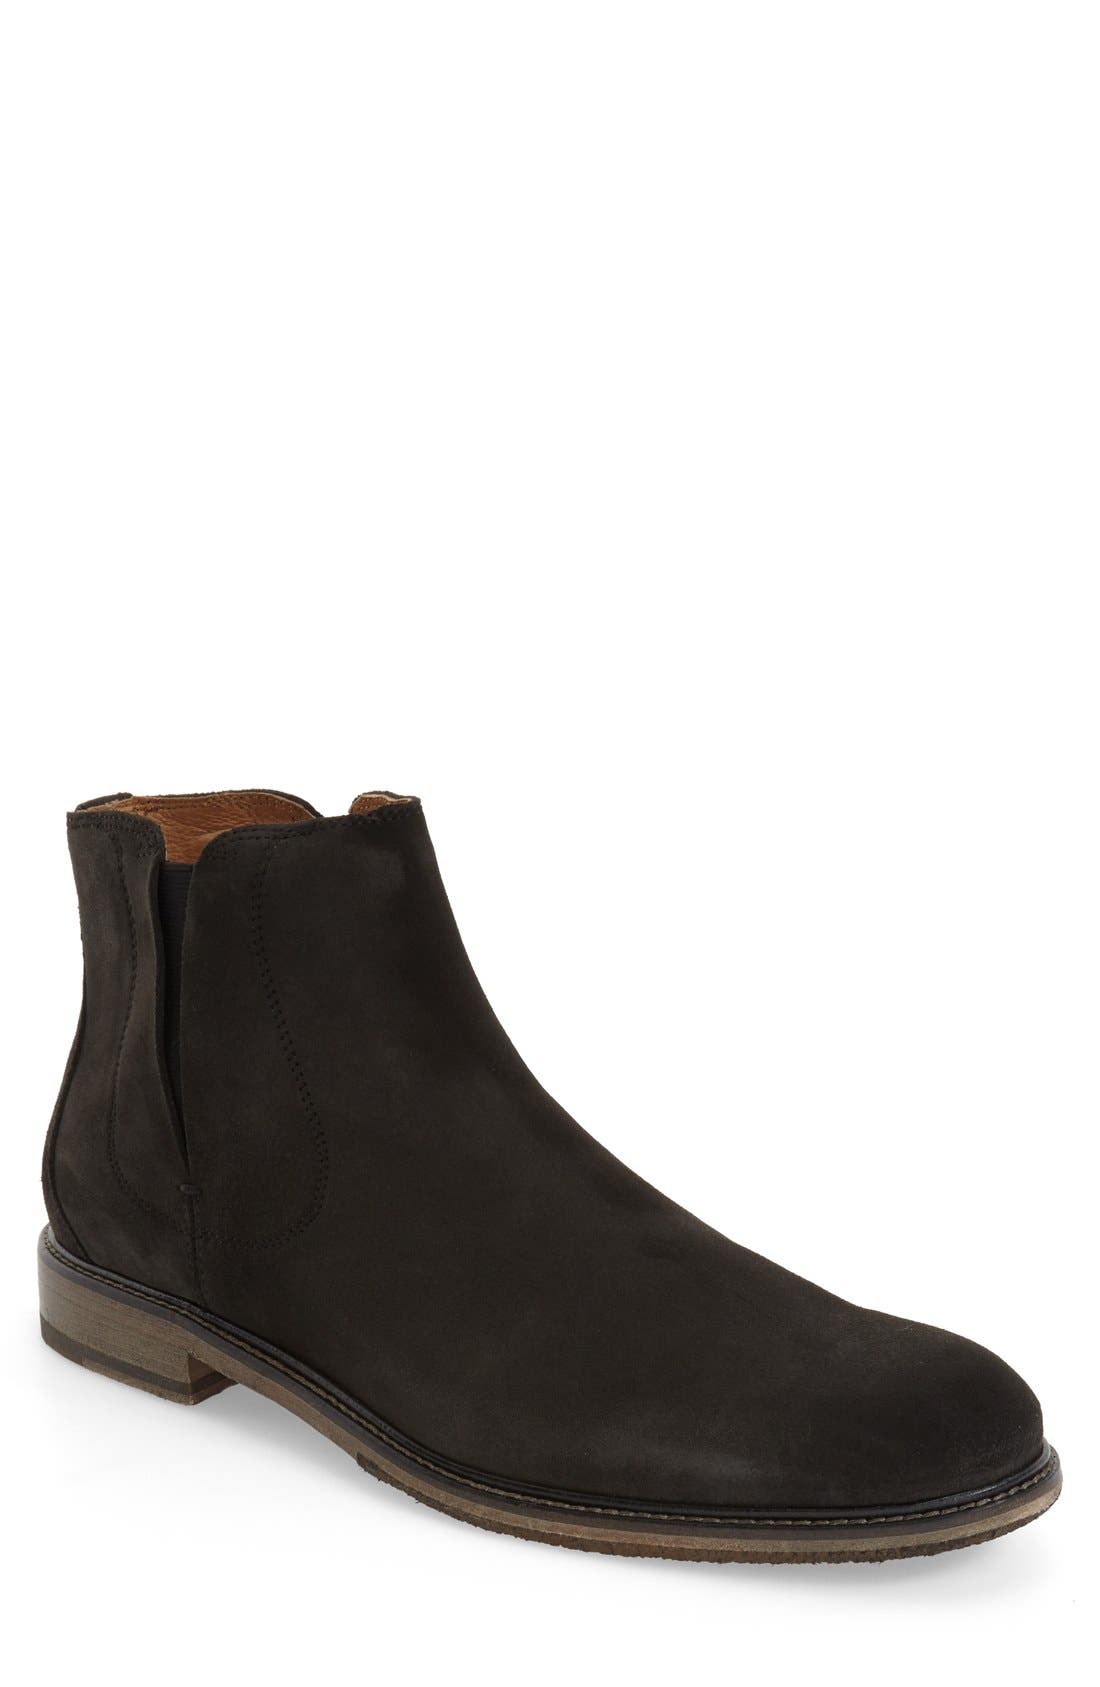 chelsea boots usa